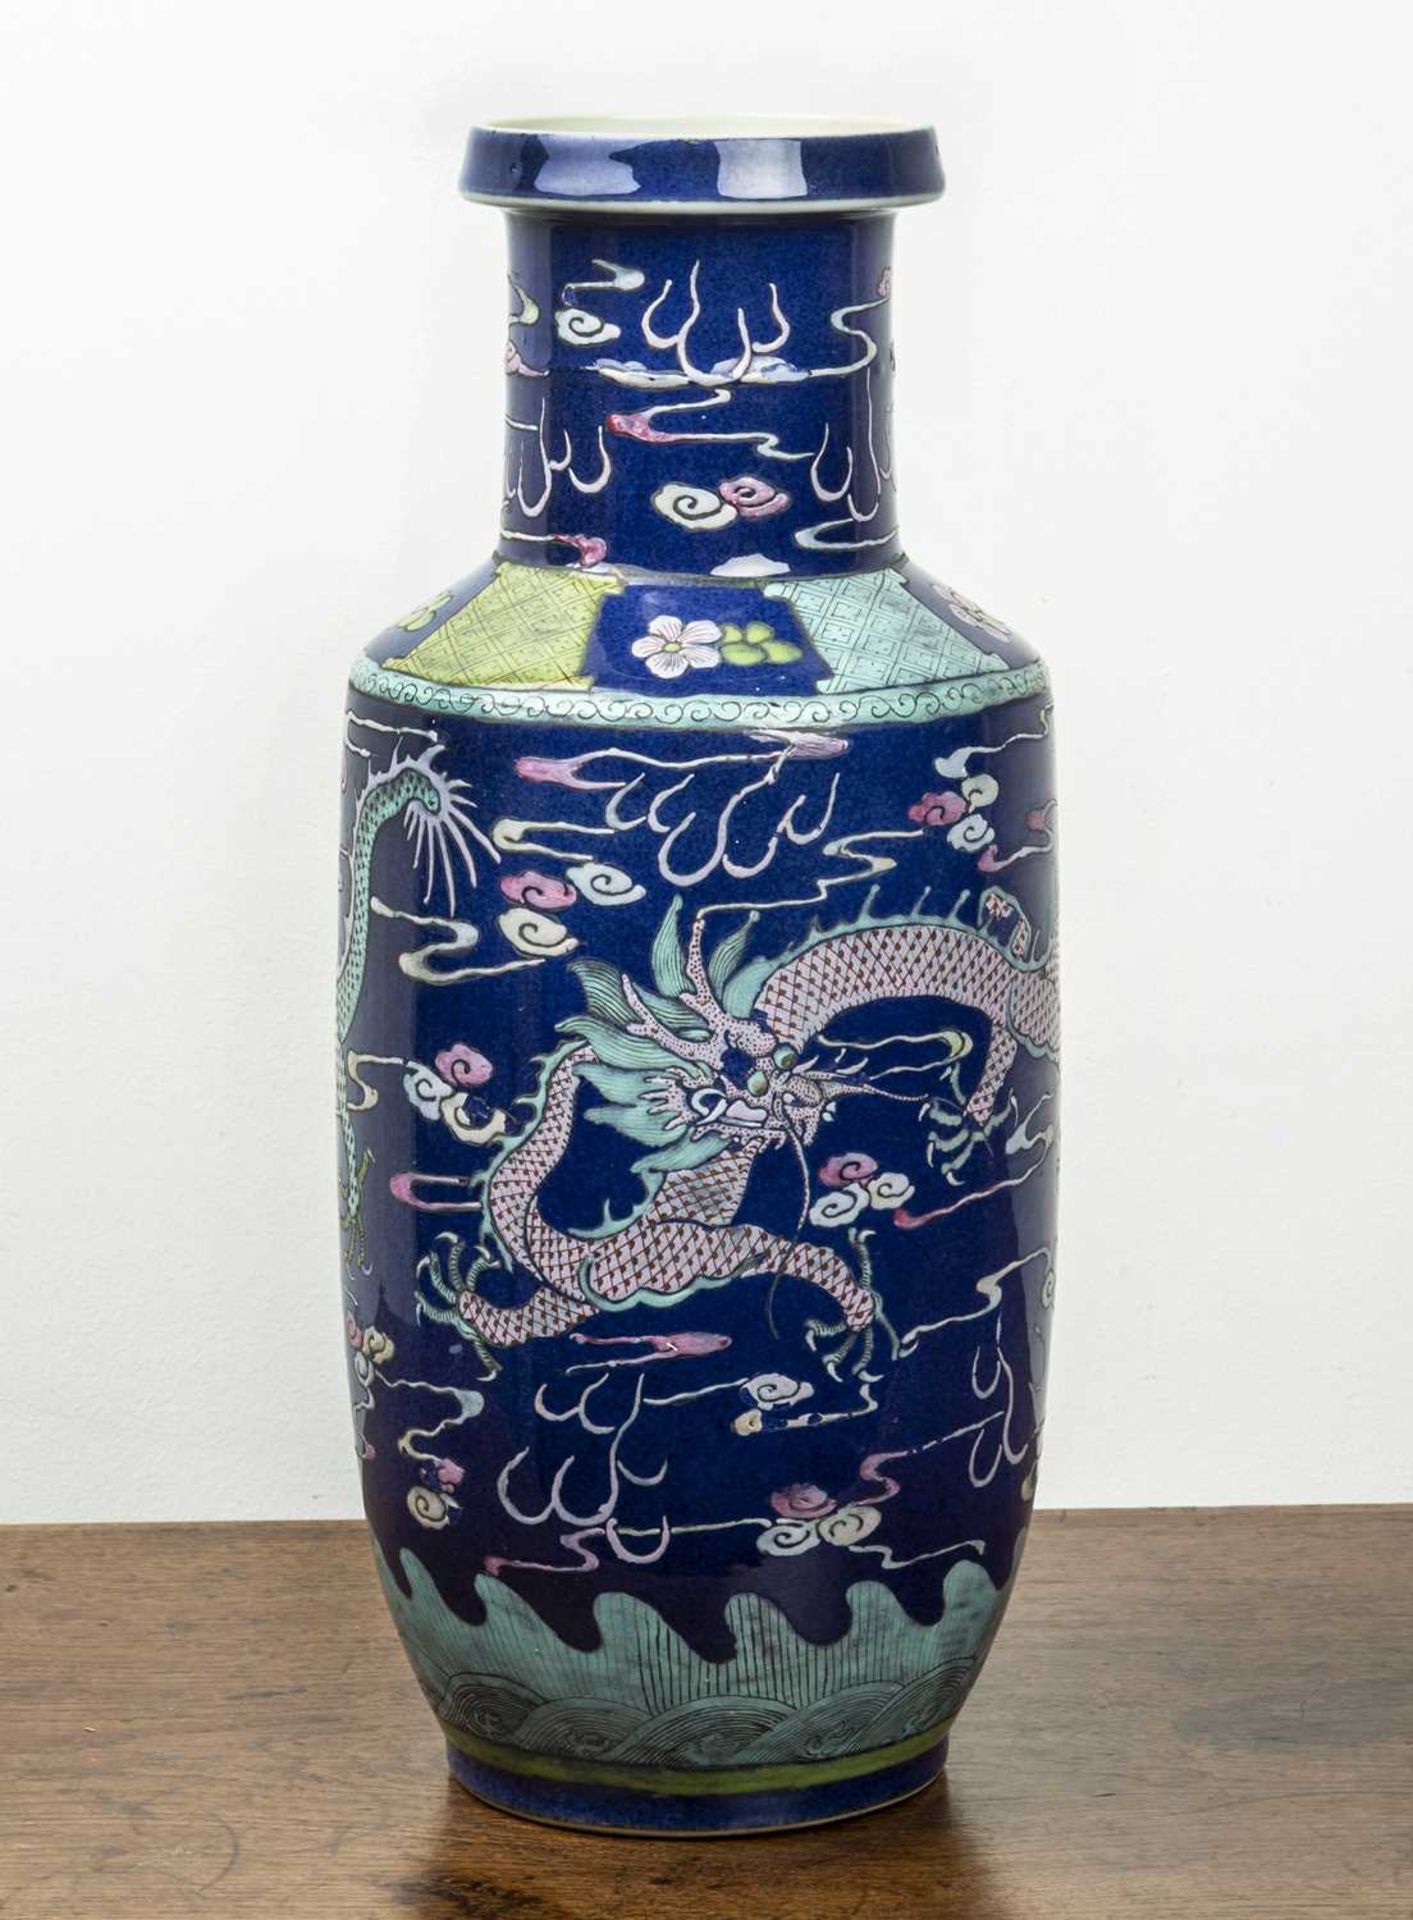 Blue ground rouleau vase Chinese, 19th/20th Century painted in enamels with dragons and flaming - Image 2 of 4